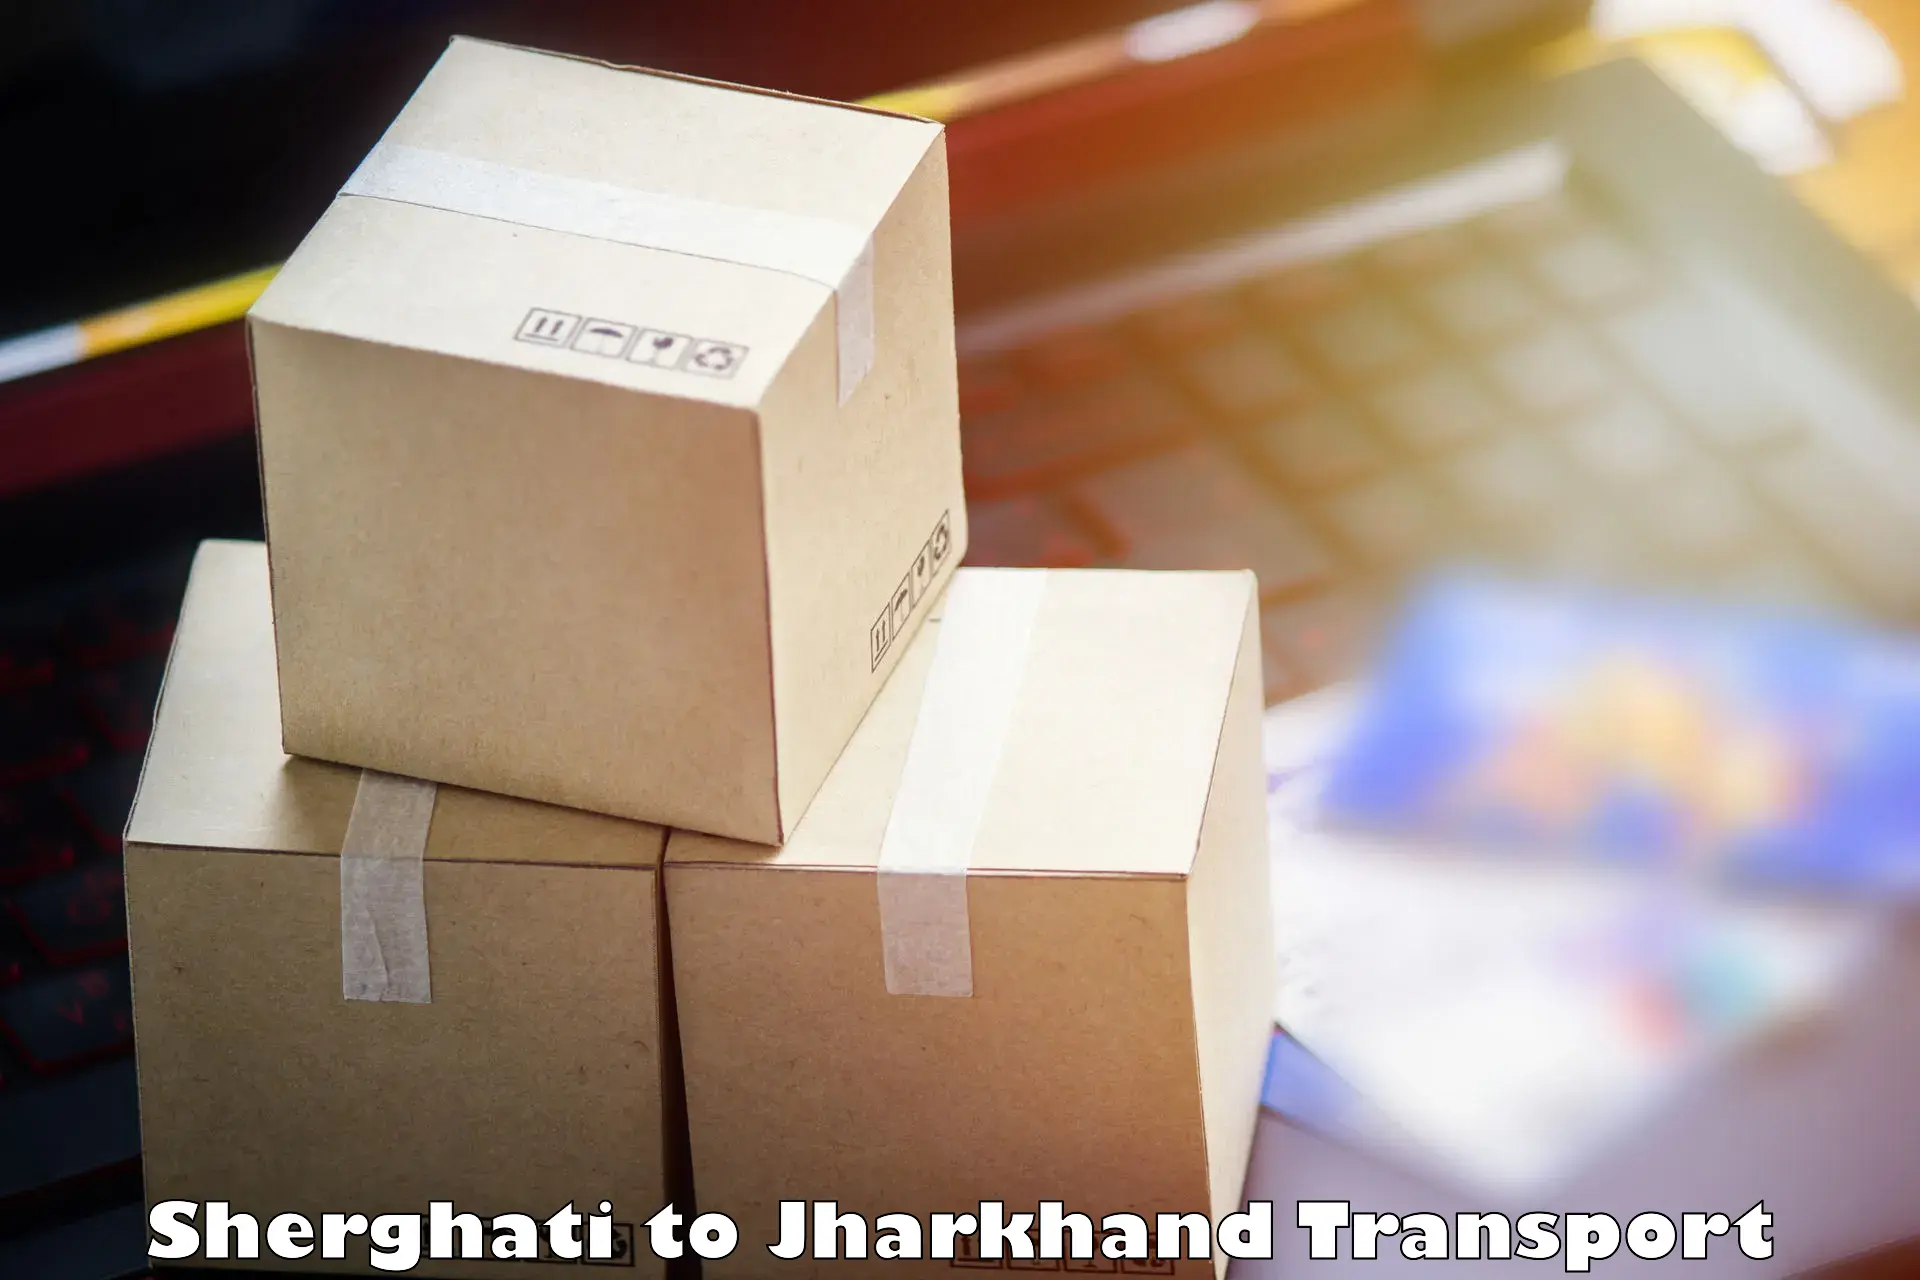 Container transport service Sherghati to IIT Dhanbad